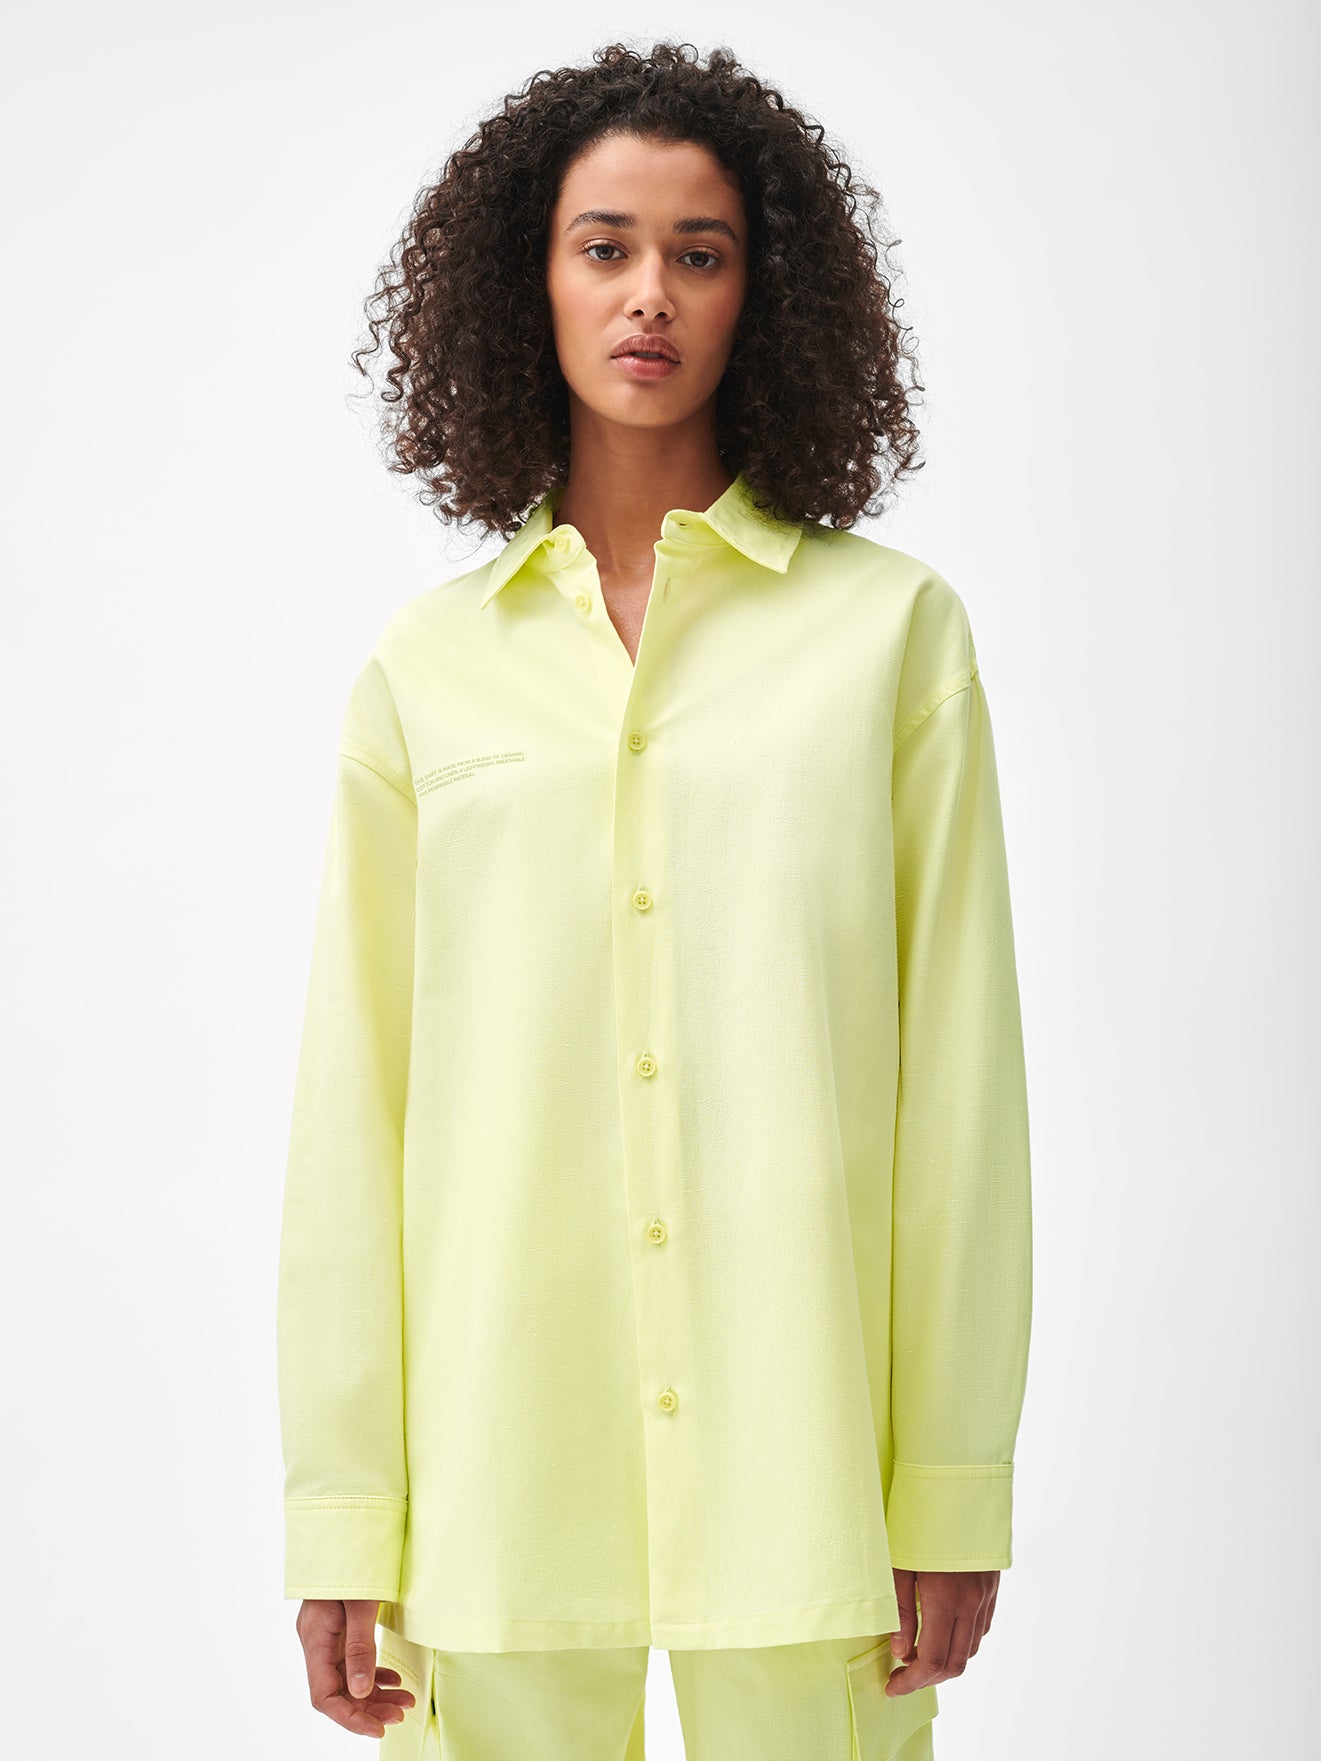 Cotton-Linen-Overshirt-Andes-Green-Model-Female-1